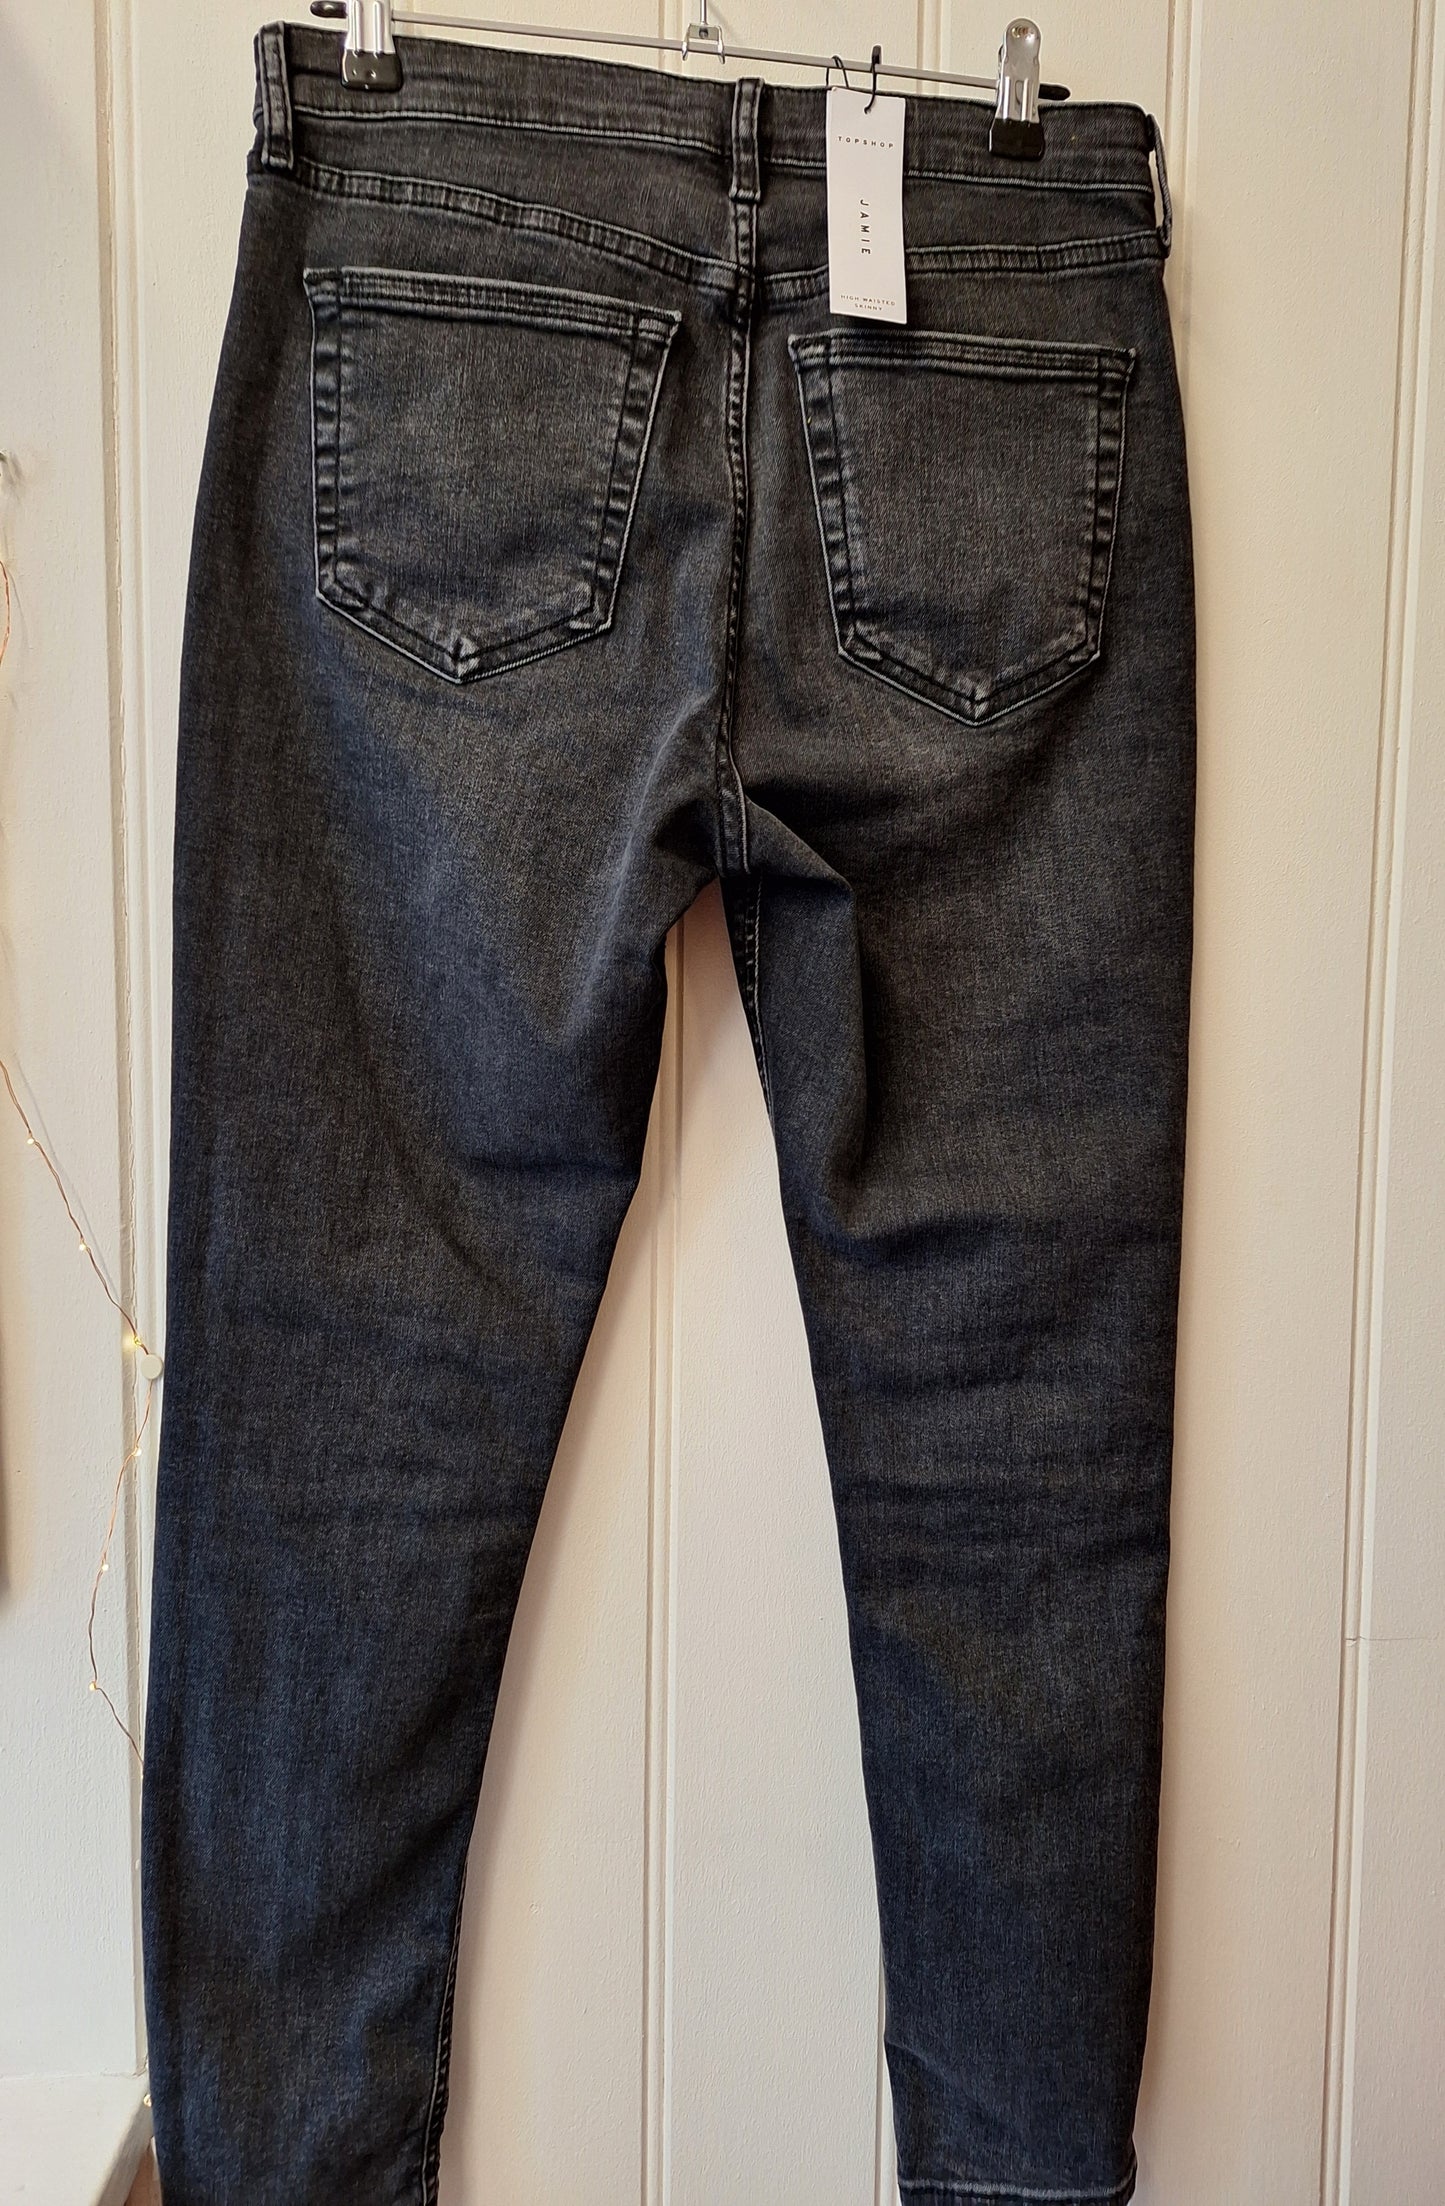 TOPSHOP black high waisted skinny jeans W30